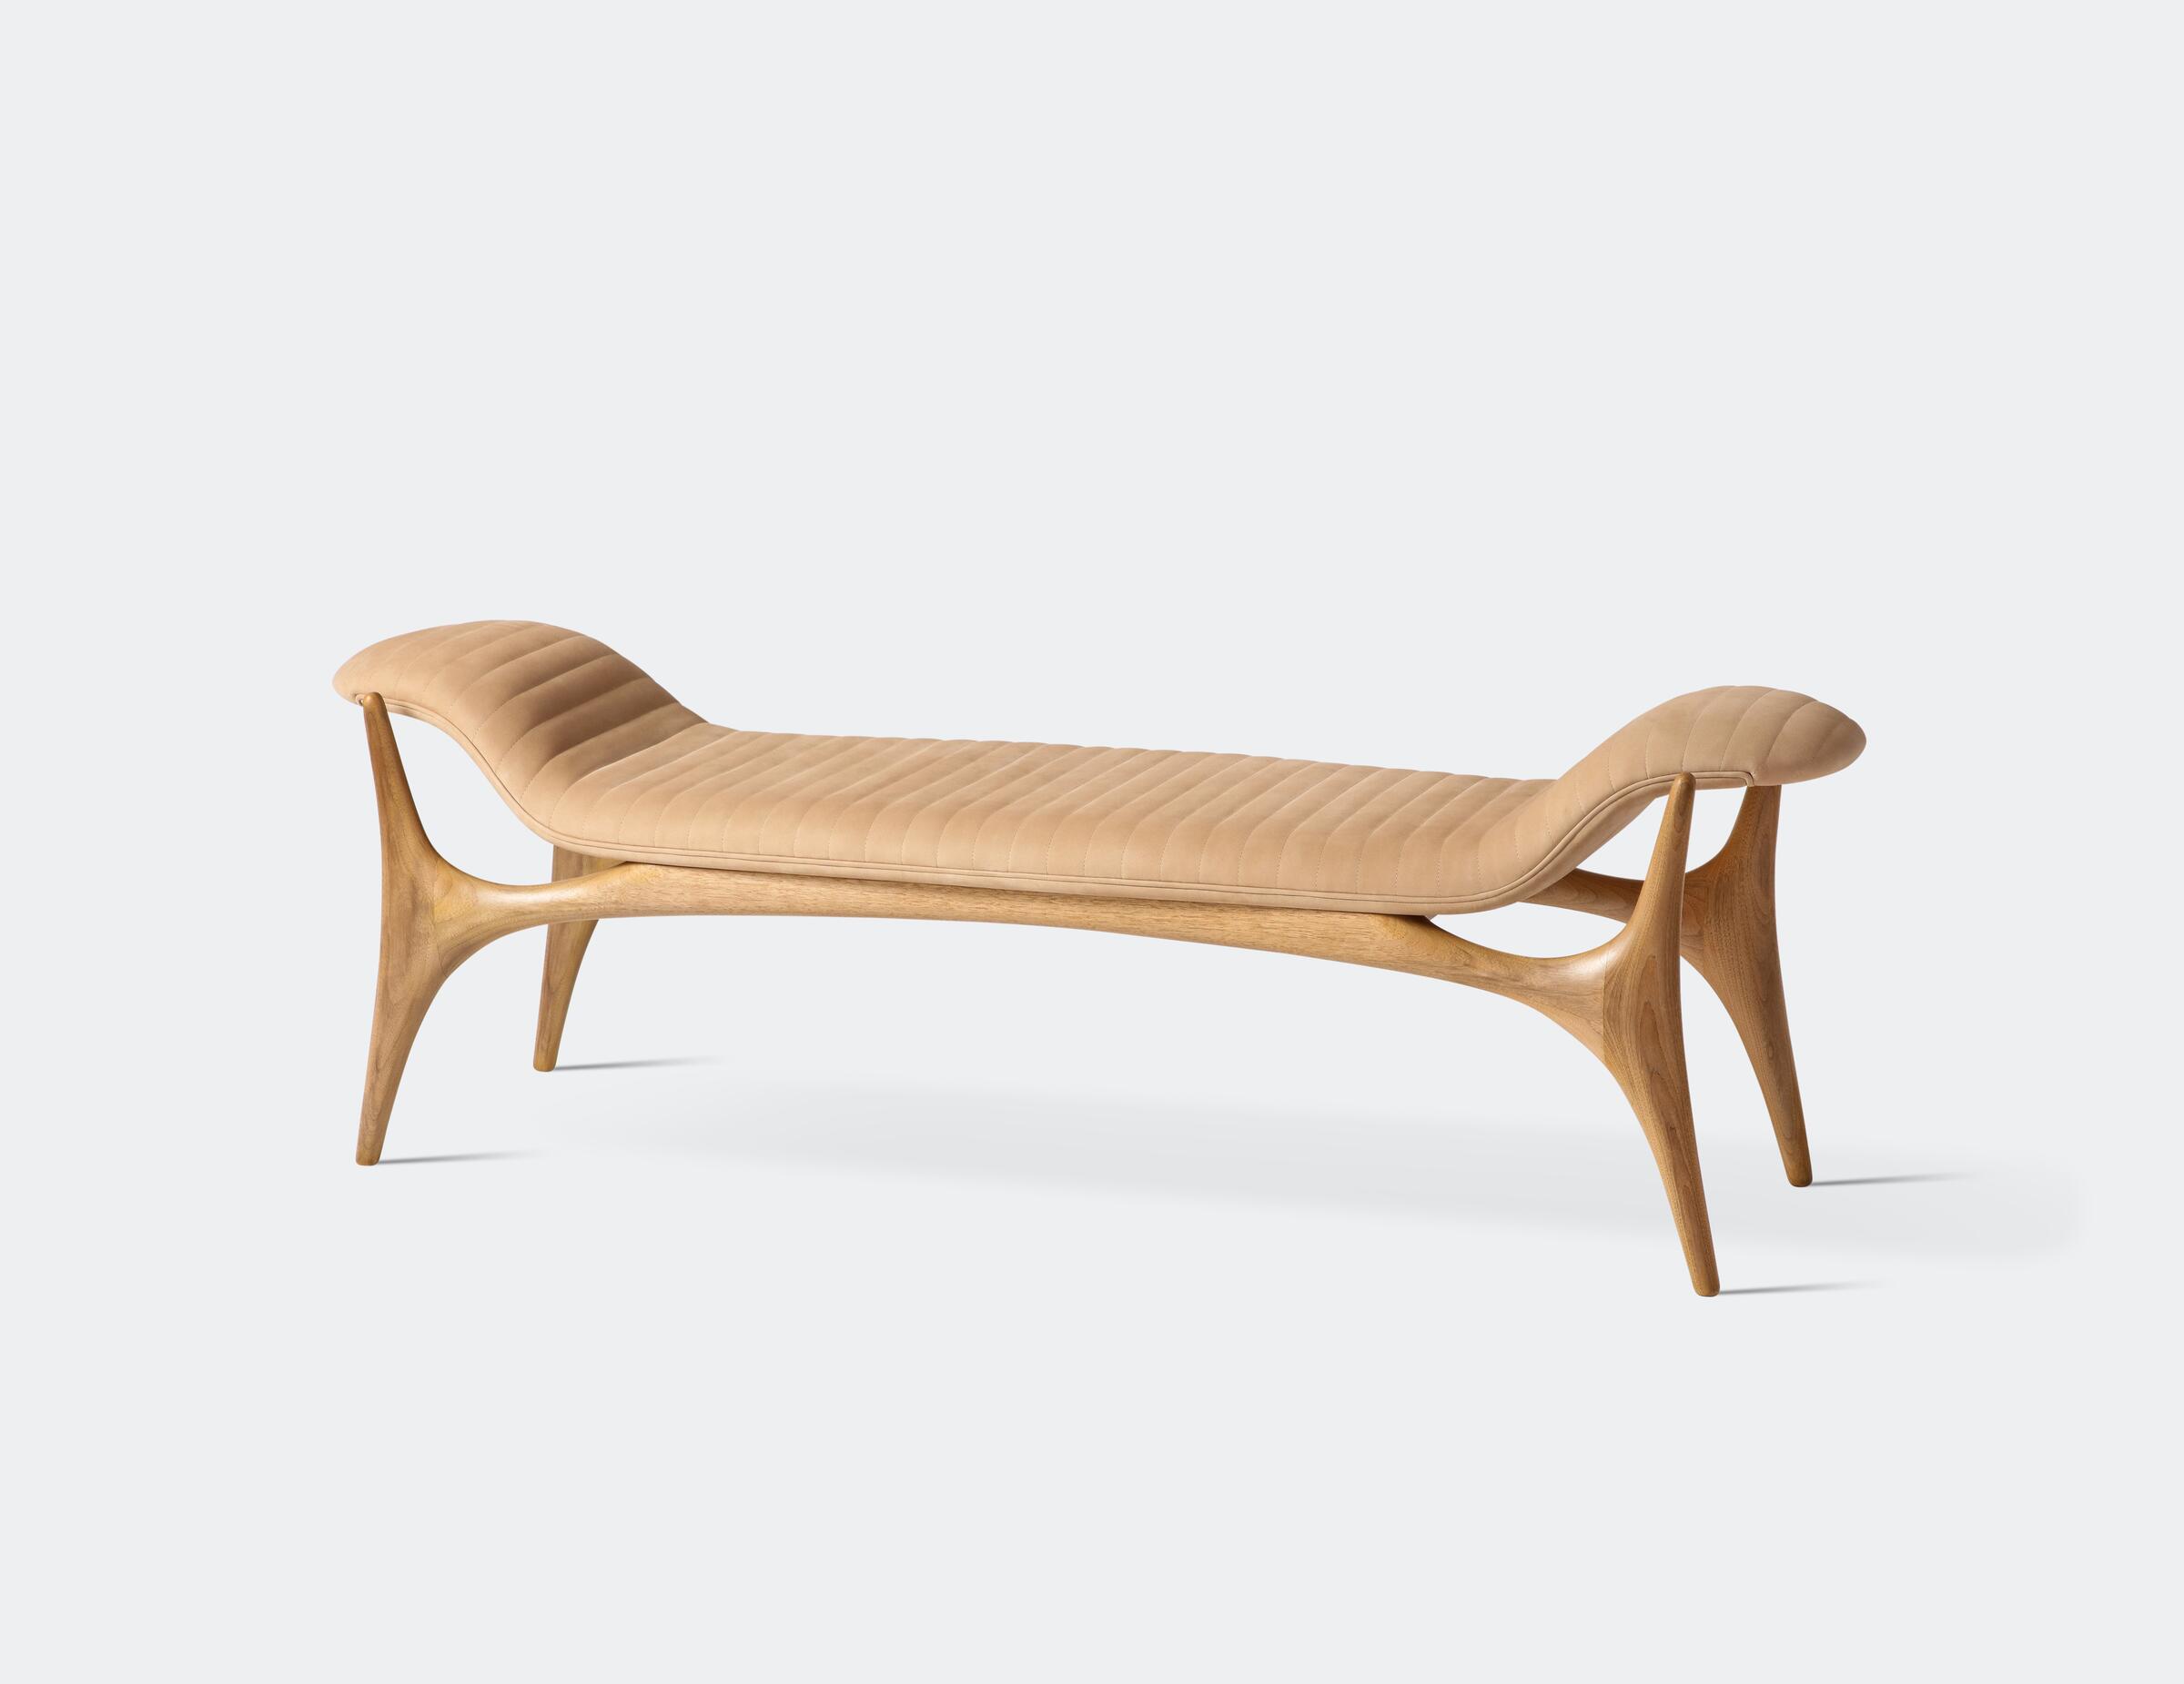 Sculpted Wood Bench, Walnut Sand, Nordic: Autumn